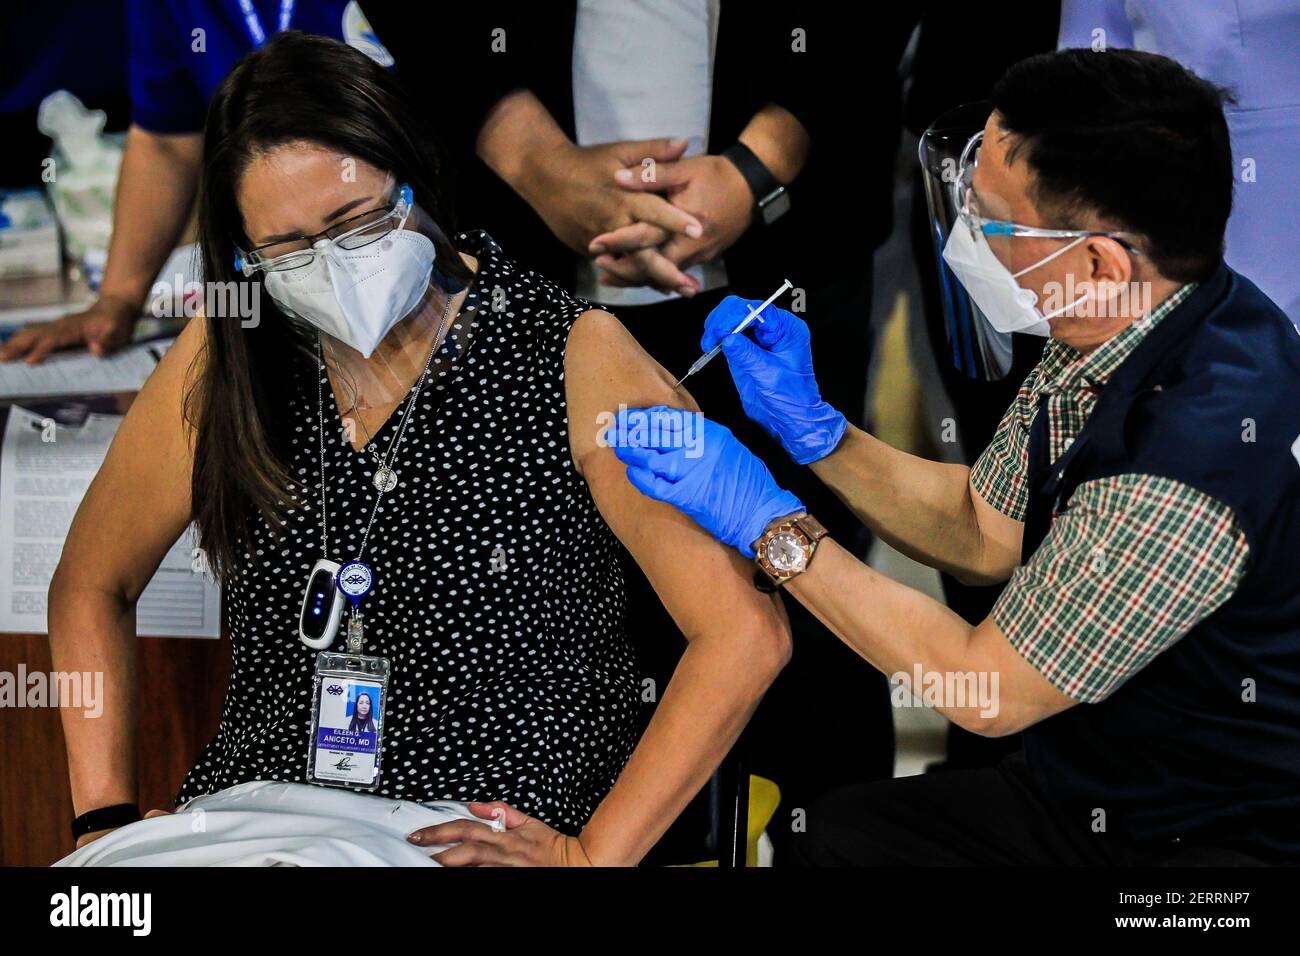 Manila. 1st Mar, 2021. Philippine Department of Health Secretary Francisco Duque III injects a shot of COVID-19 vaccine from China's Sinovac to a doctor on the first day of the vaccination at the Lung Center of the Philippines in Manila, the Philippines on March 1, 2021. The Philippines launched its coronavirus vaccination campaign on Monday, less than a day after the arrival of the Sinovac vaccine CoronaVac donated by China. Credit: Rouelle Umali/Xinhua/Alamy Live News Stock Photo